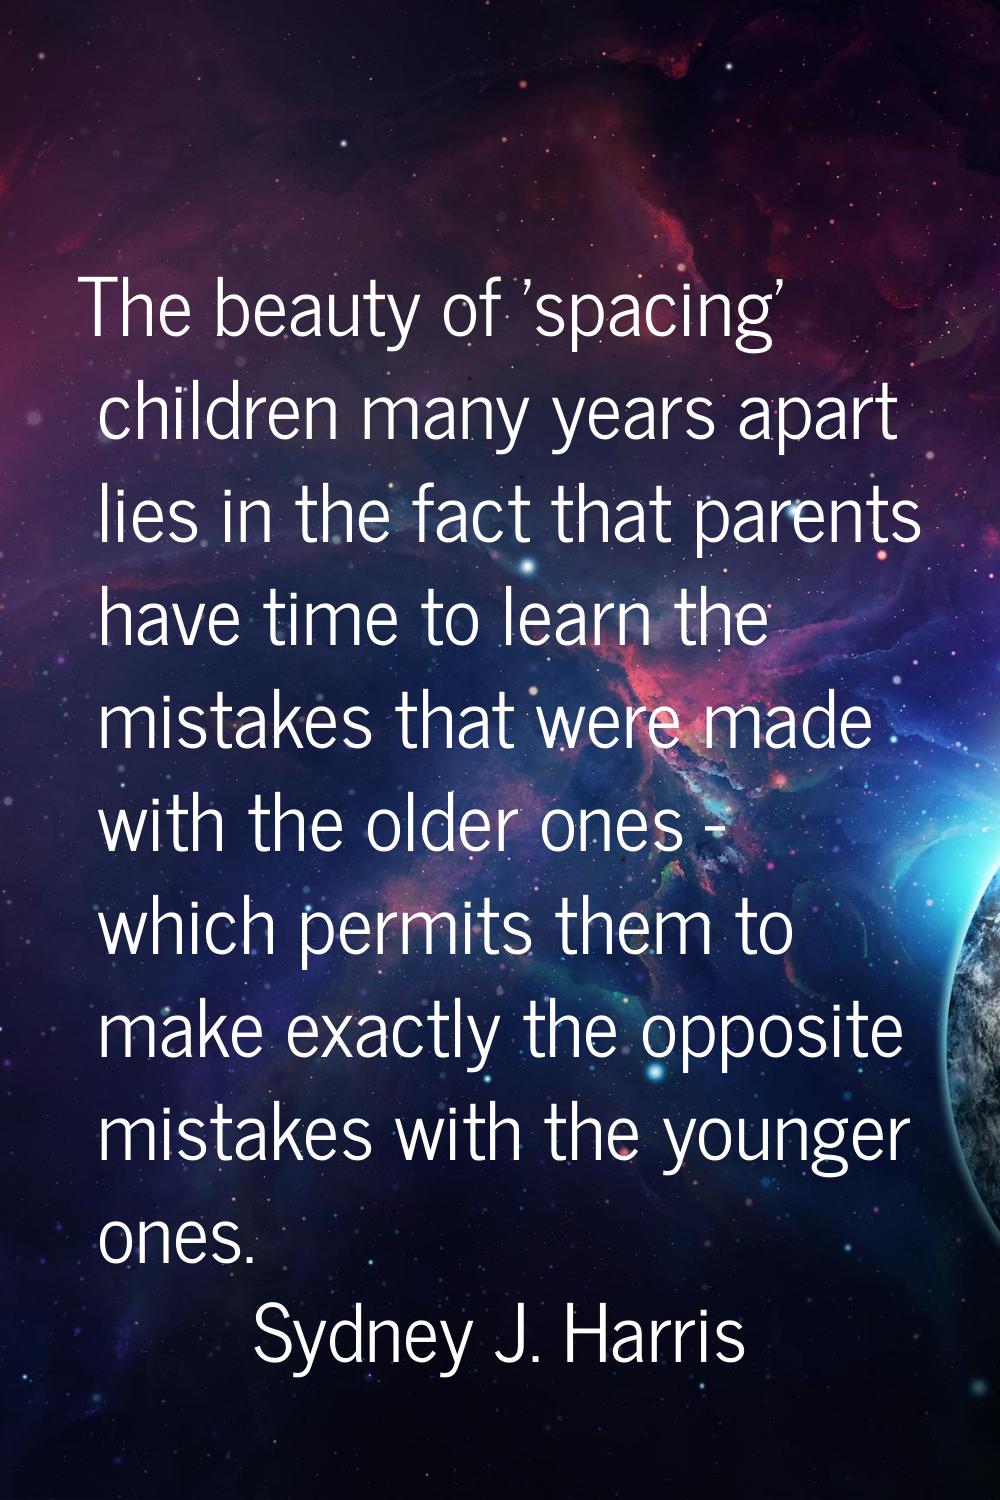 The beauty of 'spacing' children many years apart lies in the fact that parents have time to learn 